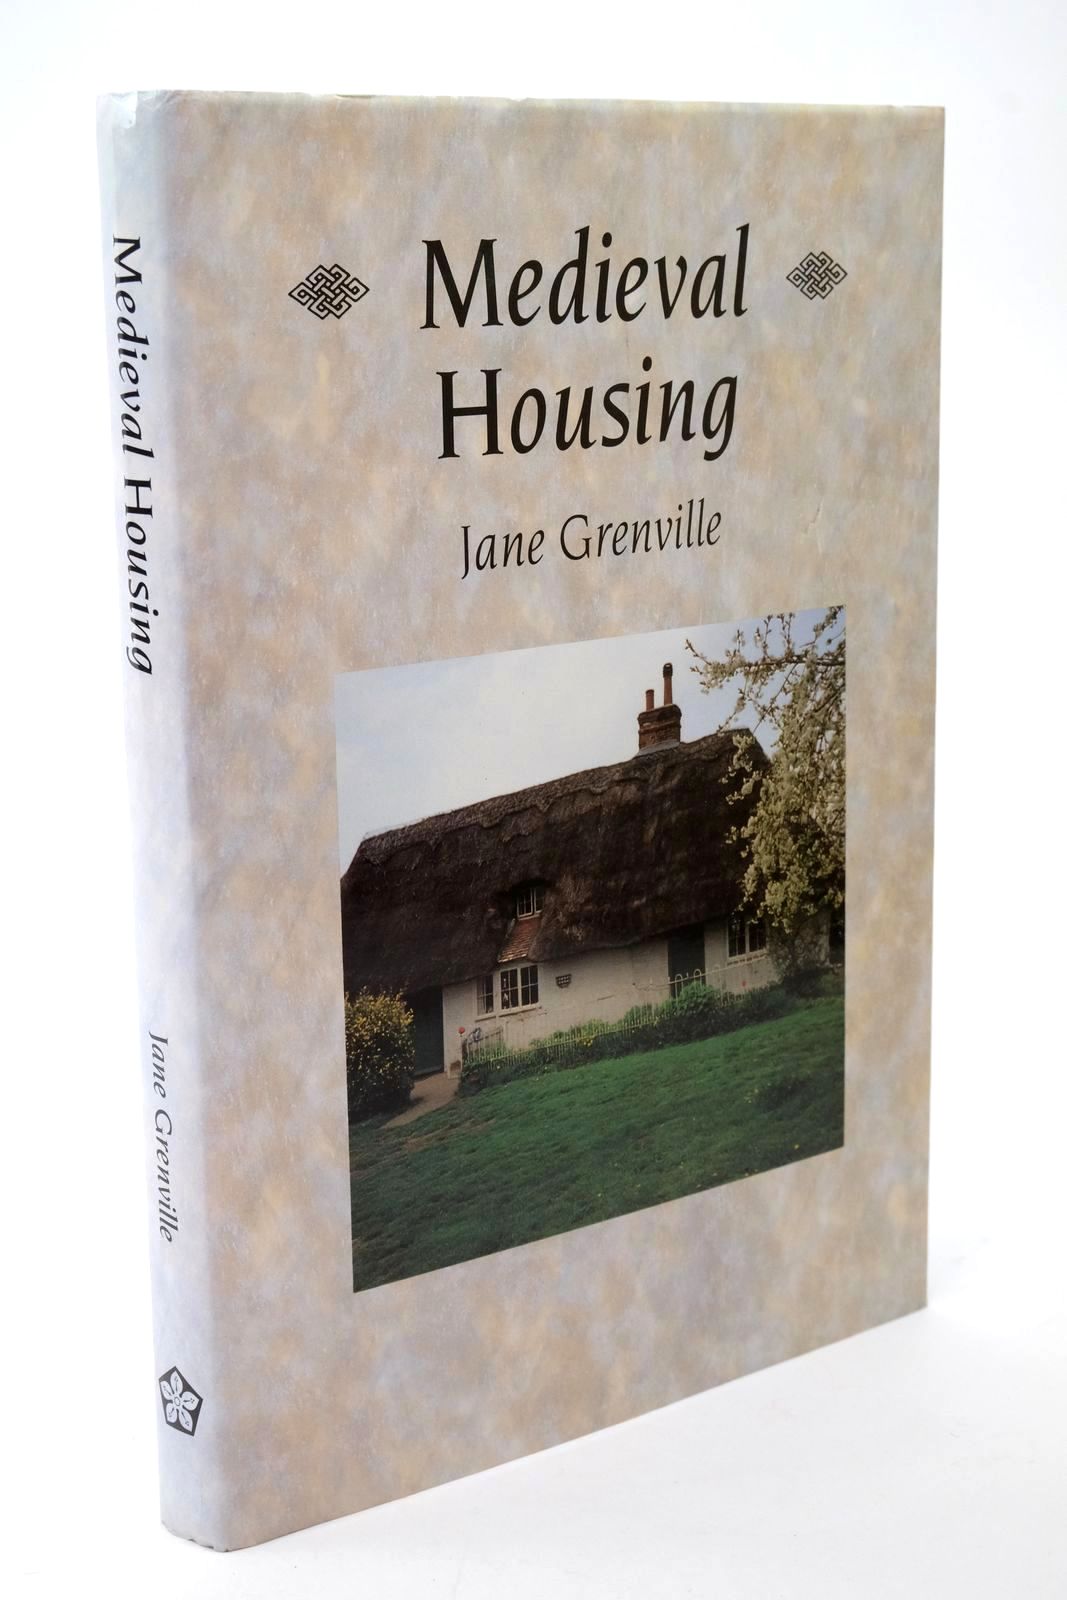 Photo of MEDIEVAL HOUSING written by Grenville, Jane published by Leicester University Press (STOCK CODE: 1322482)  for sale by Stella & Rose's Books